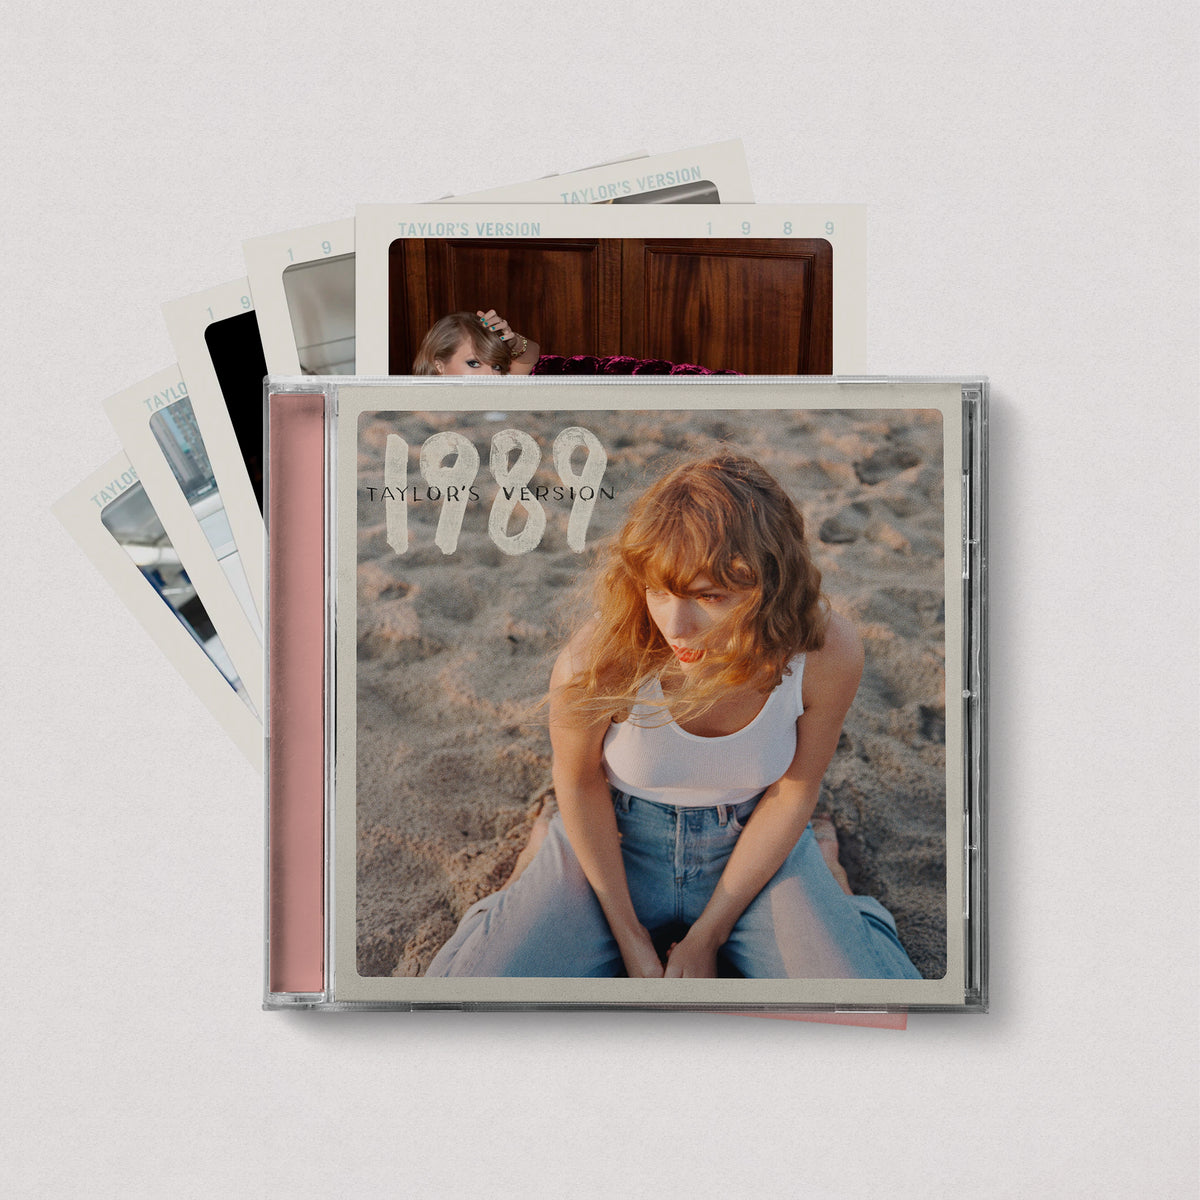 Taylor Swift - 1989 "Taylor's Version" (Rose Garden Pink Edition, Deluxe CD)